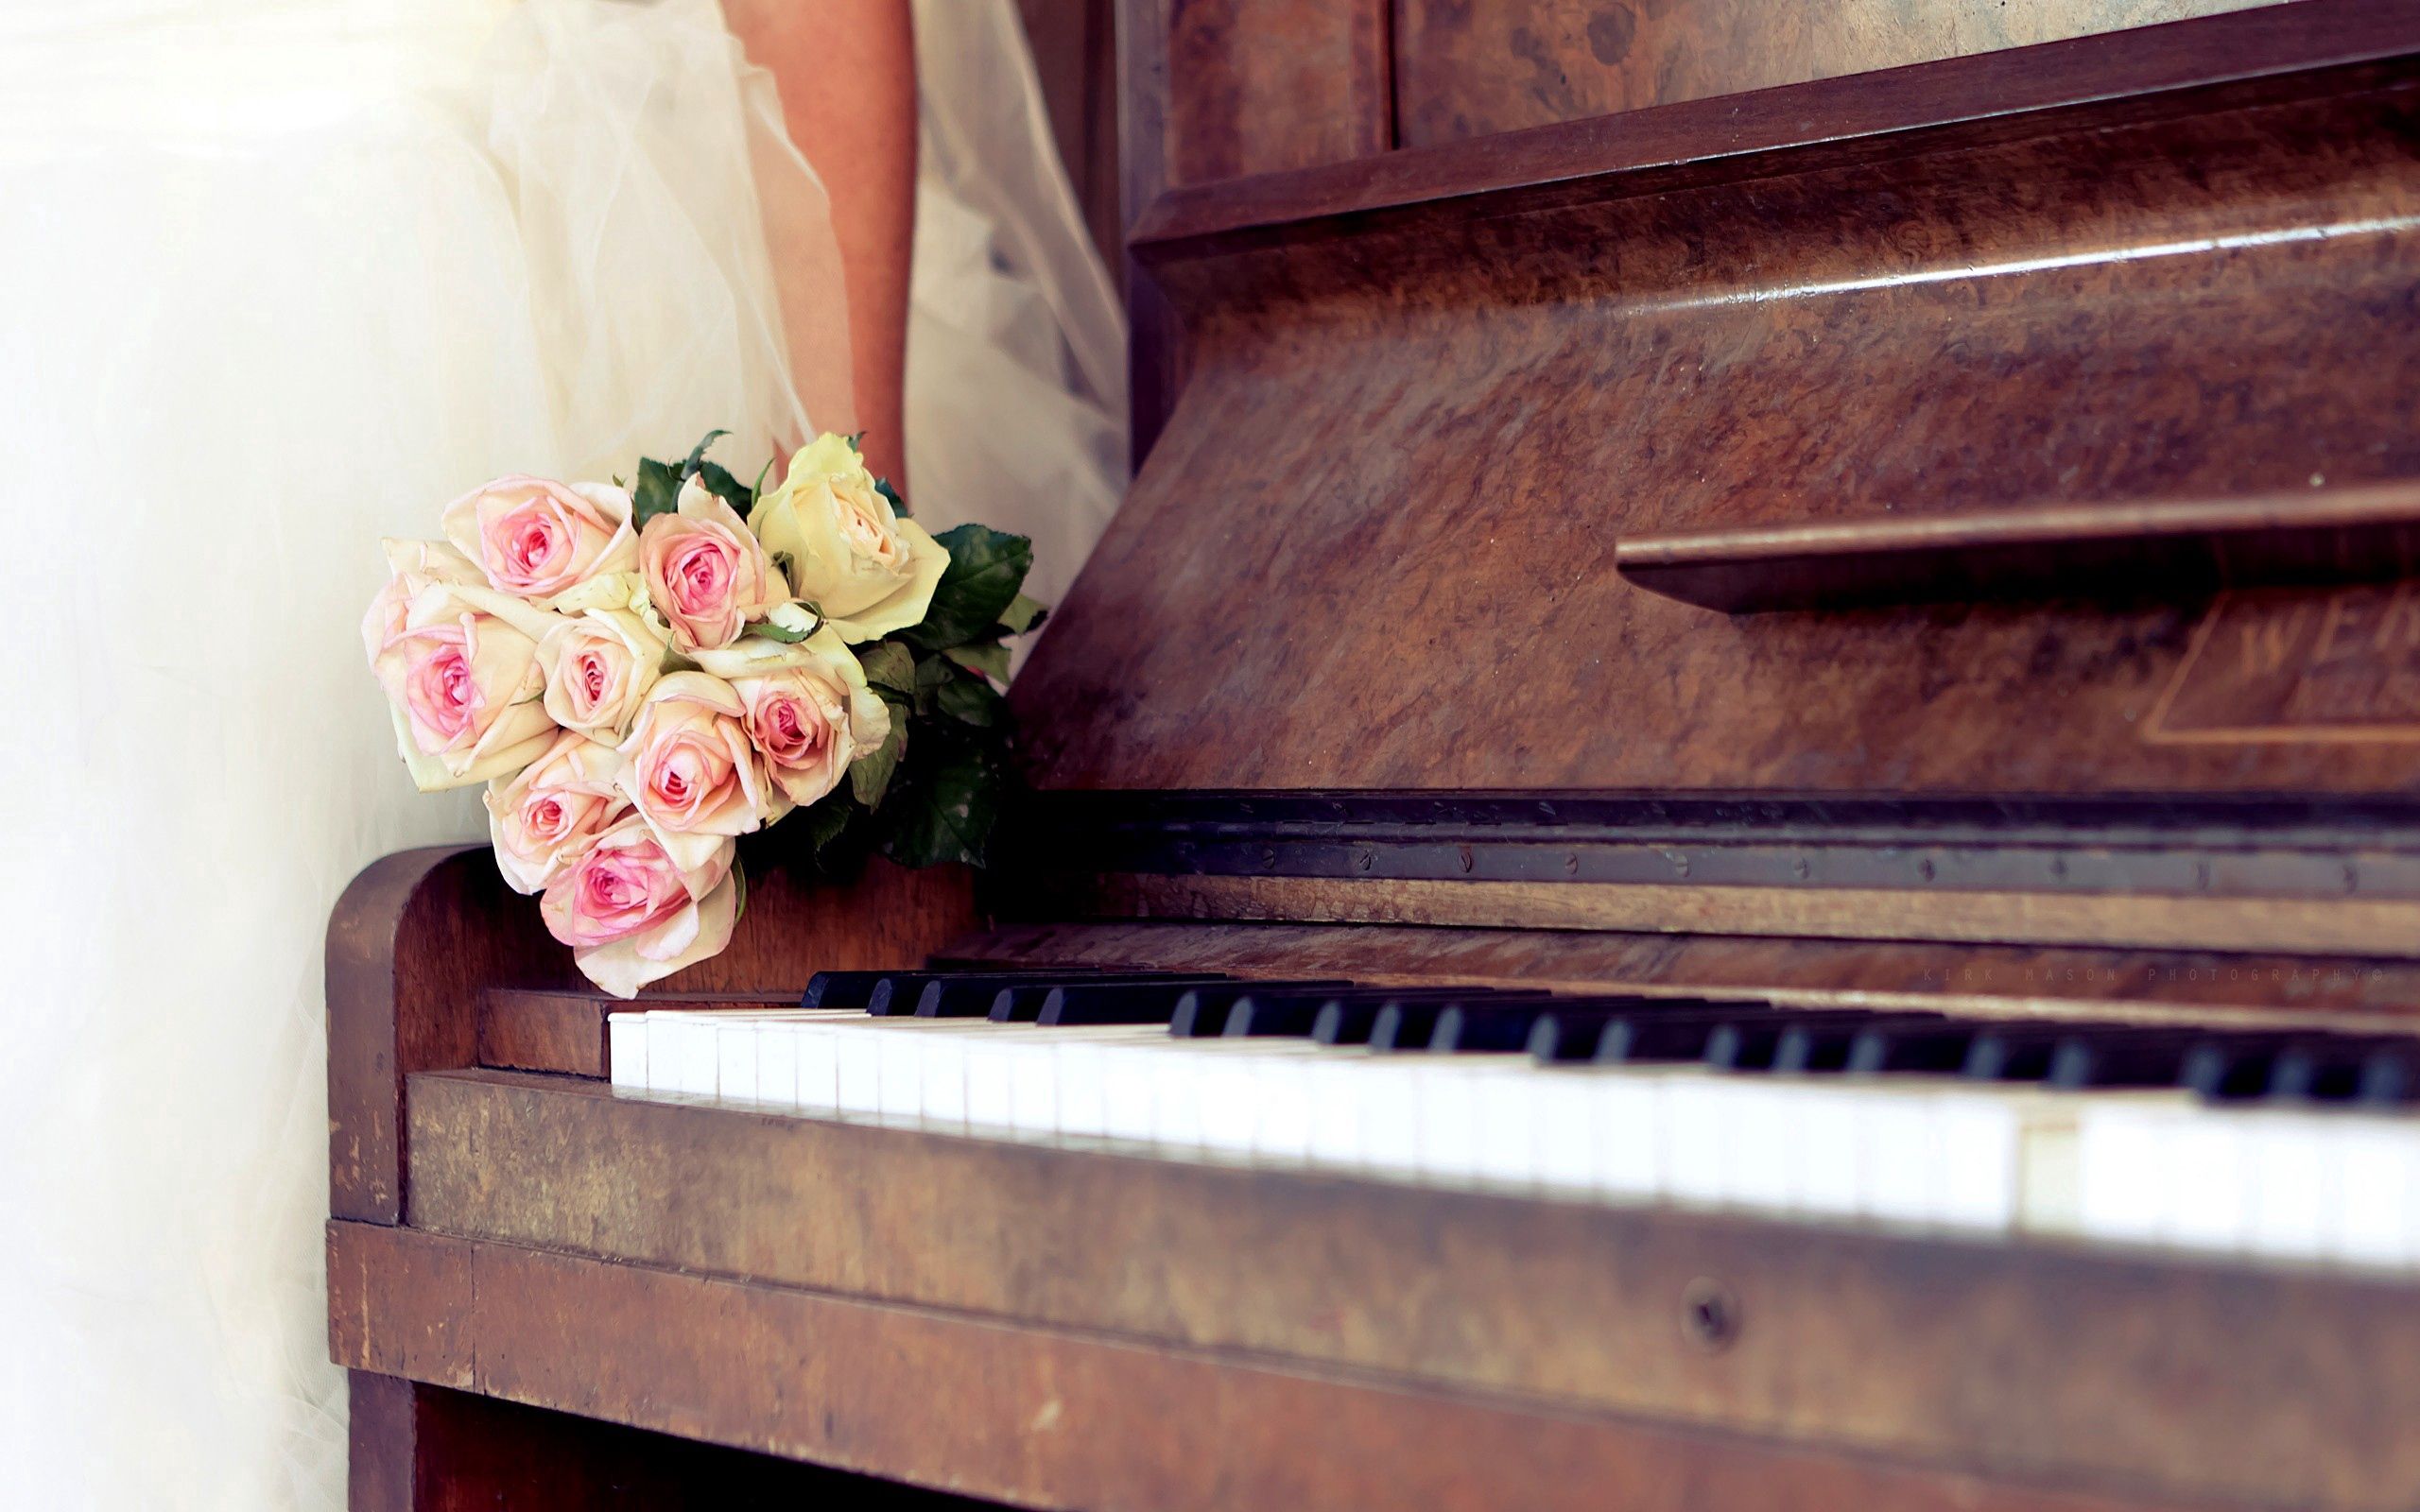 Download PC Wallpaper music, flowers, roses, piano, bouquet, bride